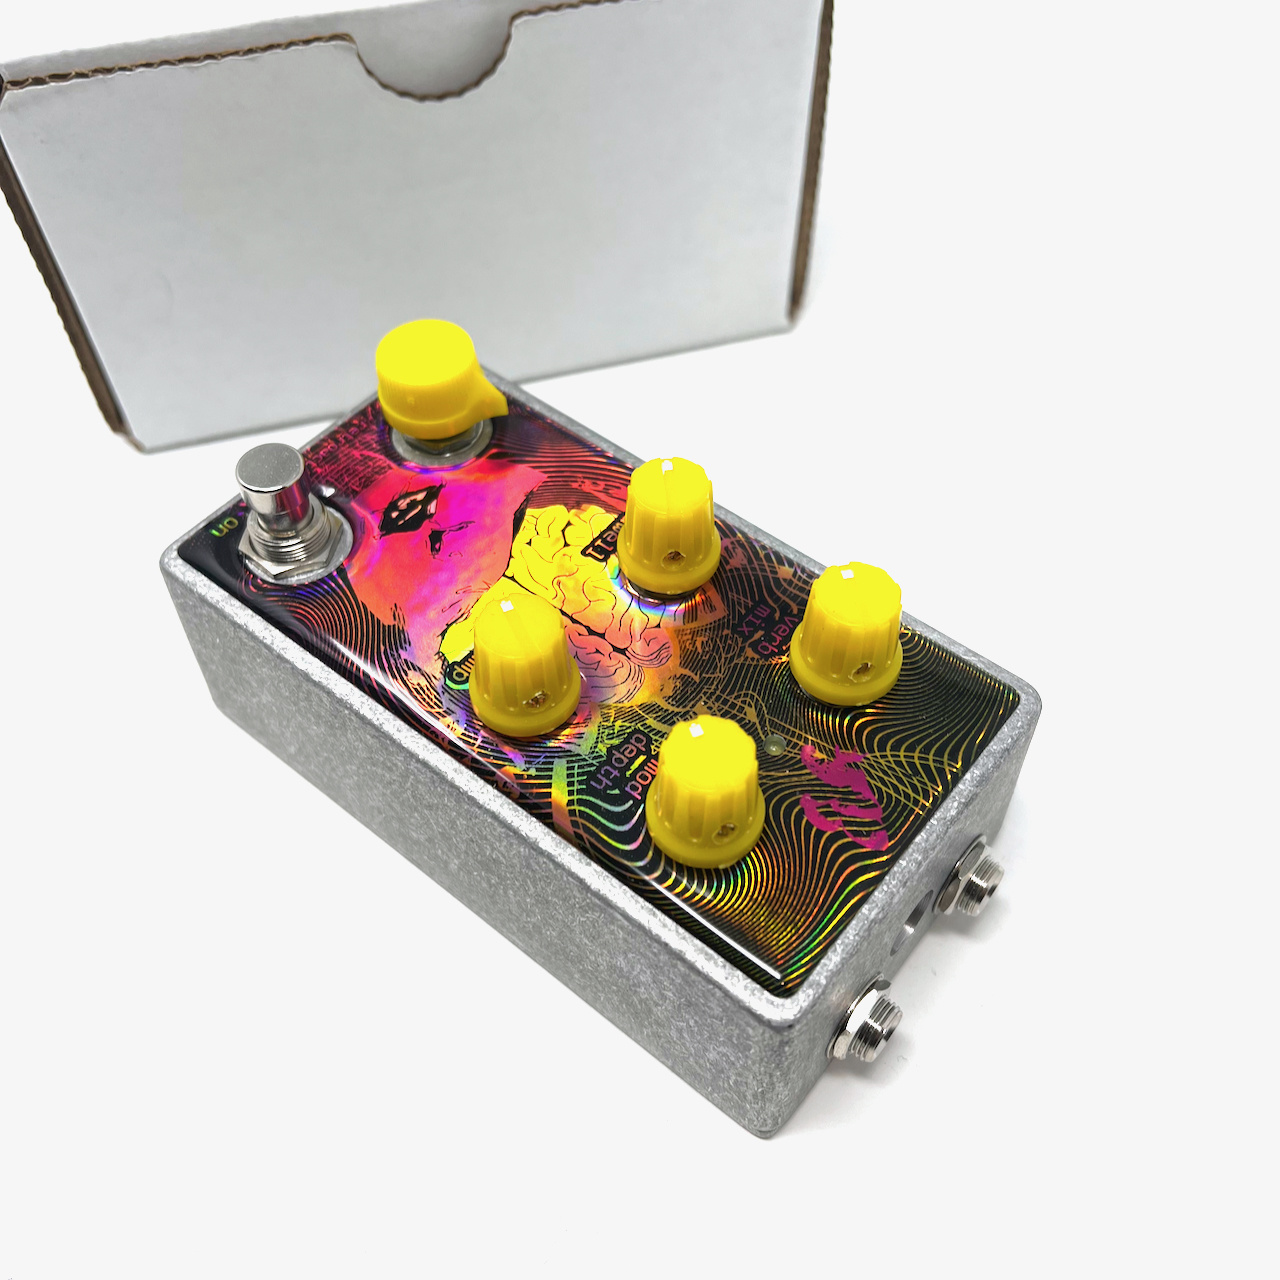 Retroactive Pedals Validity Sensor Digital Reverb with Frequency Divider LFO (Frequency Tremolo)